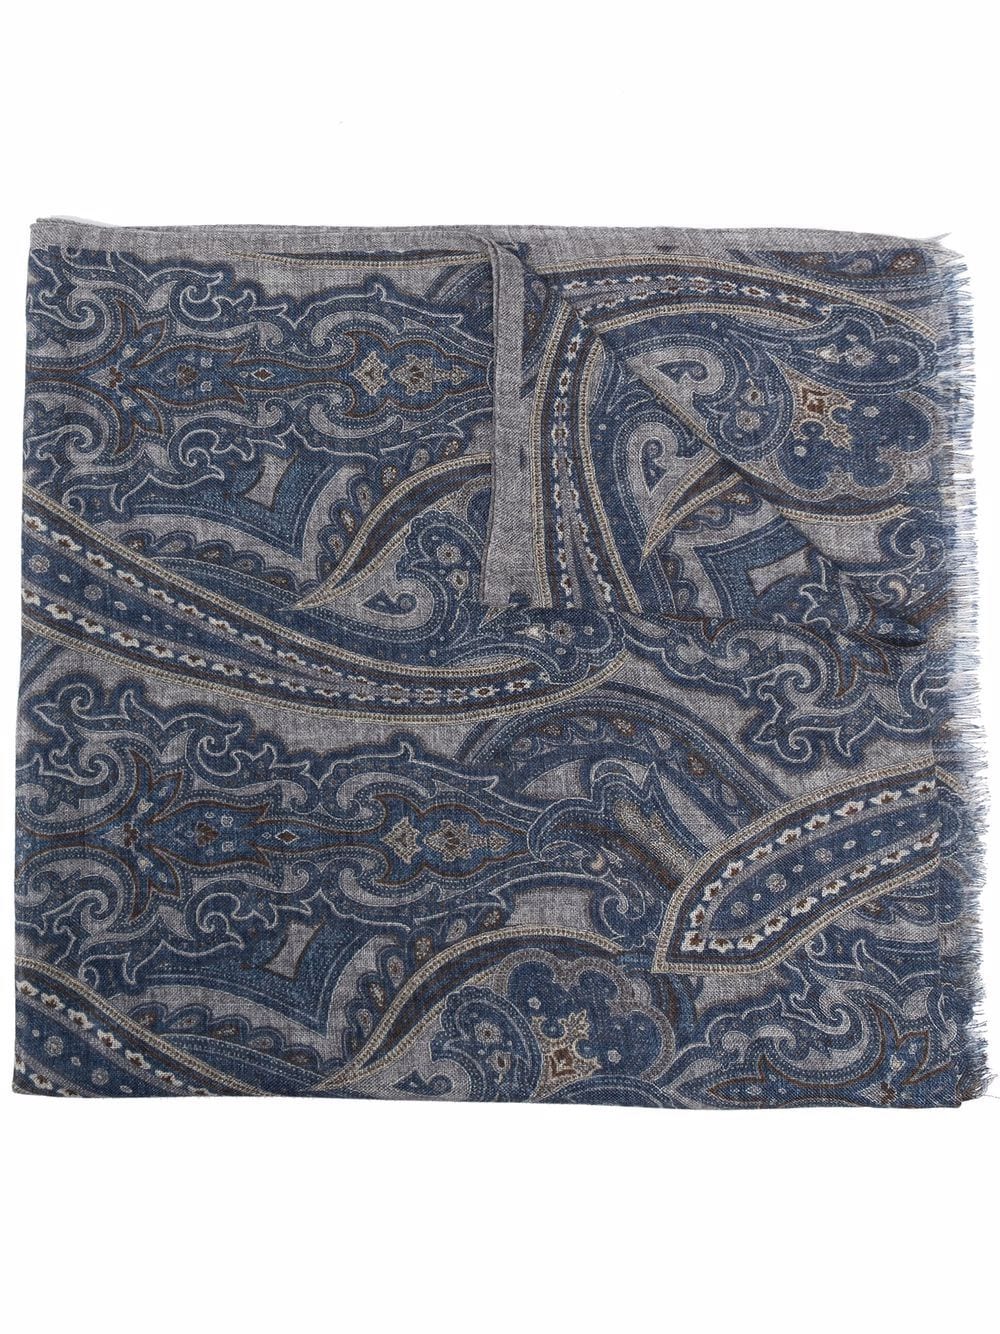 фото Lady anne paisley-print cashmere scarf